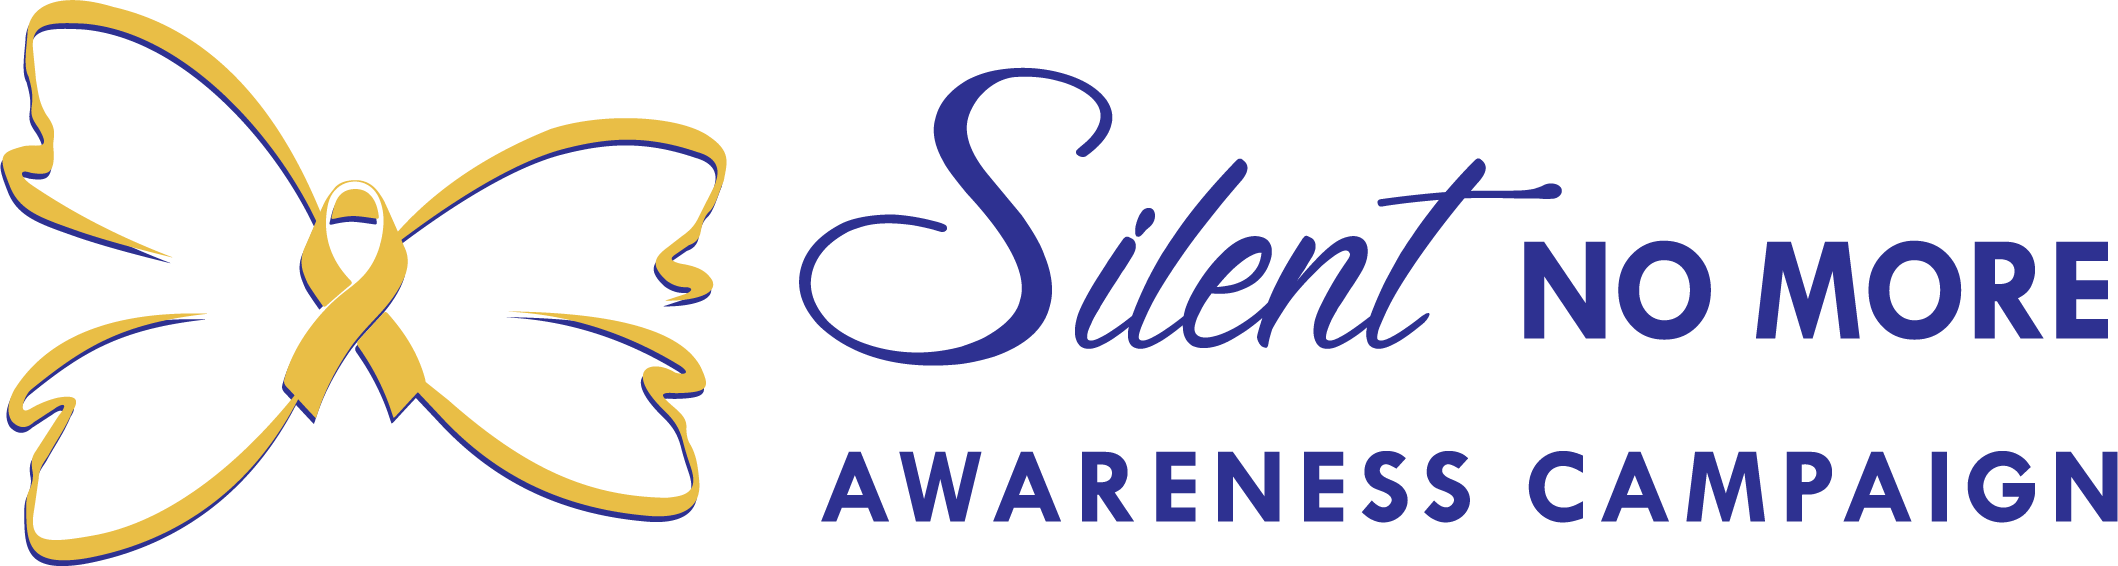 Silent No More Awareness Campaign butterfly logo